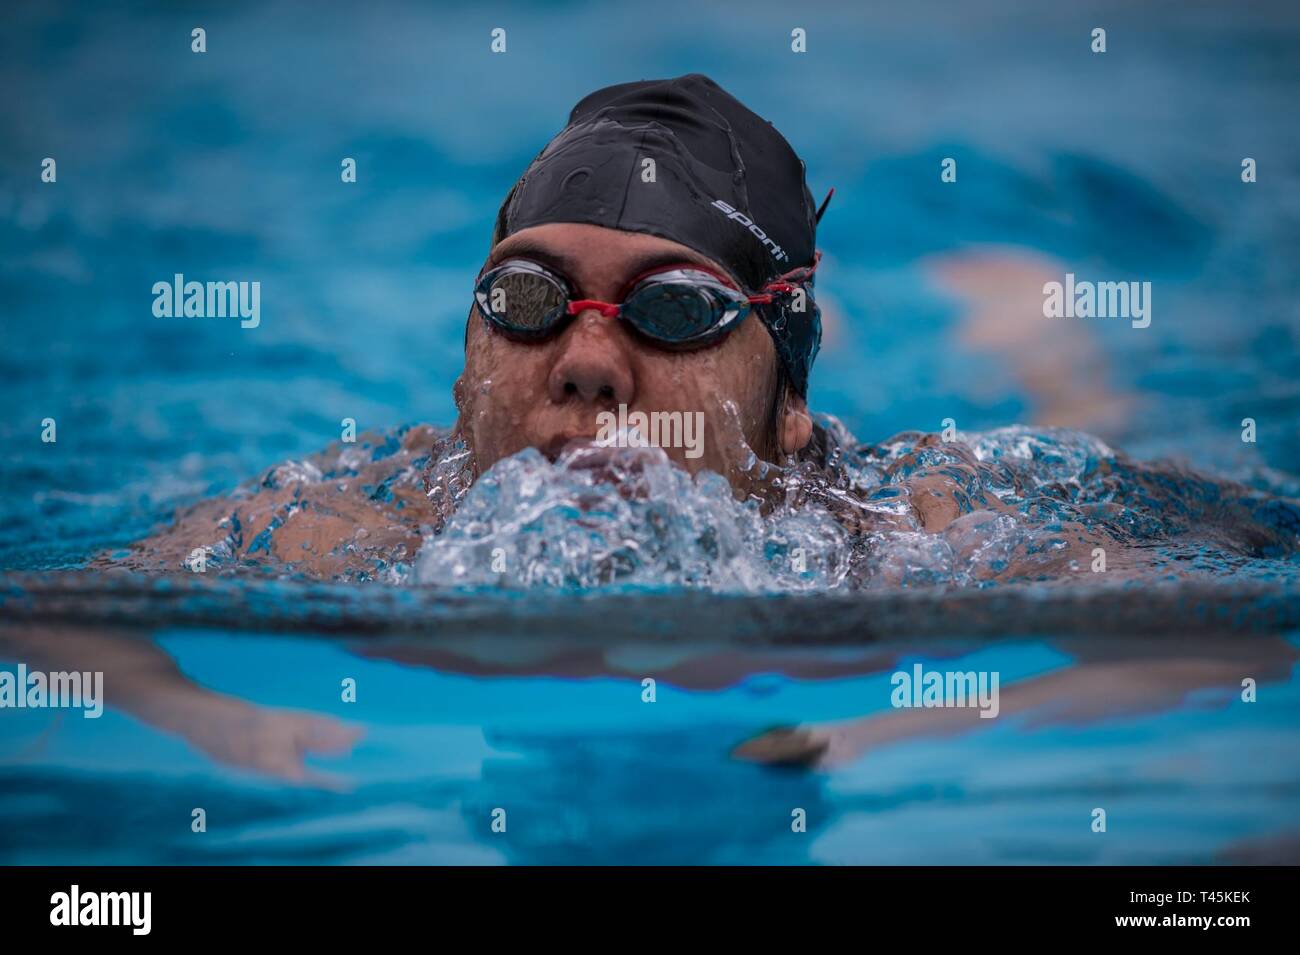 A U.S. Marine Corps athlete practices swimming during the 2019 Marine Corps Trials at Marine Corps Base Camp Pendleton, California, March 1. The Marine Corps Trials promotes recovery and rehabilitation through adaptive sports participation and develops camaraderie among recovering service members and veterans. Additionally, the competition is an opportunity for participants to demonstrate physical and mental achievements and serves as the primary venue to select Marine Corps participants for the DoD Warrior Games. Stock Photo